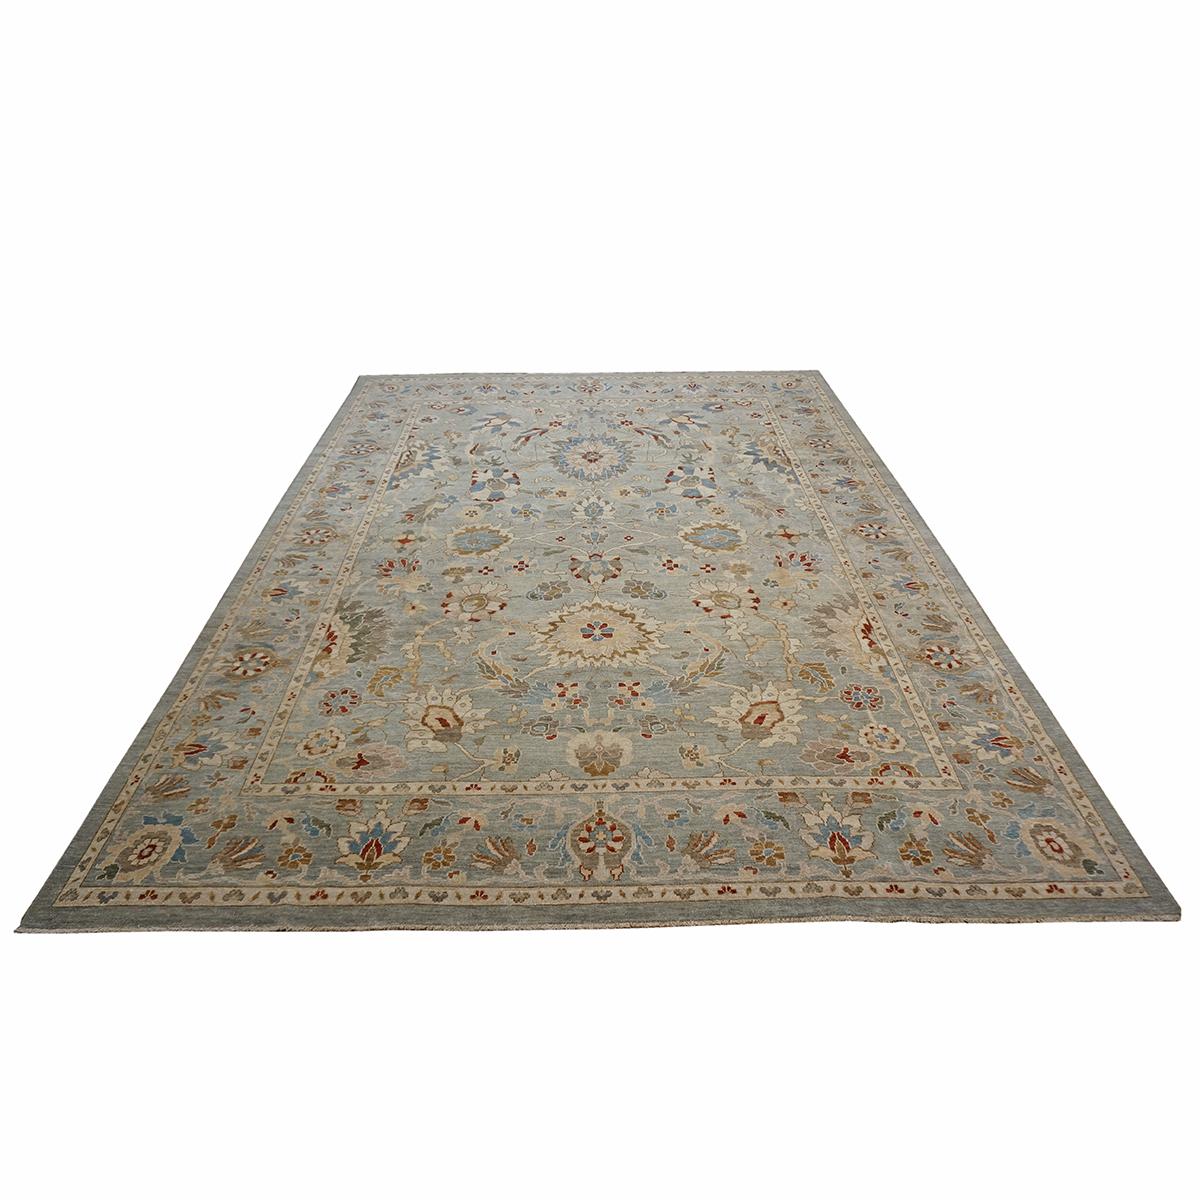  Ashly Fine Rugs presents an antique recreation of an original Persian Sultanabad hall runner. Part of our own previous production, this antique recreation was thought of and created in-house and 100% handmade in Afghanistan by master weavers.